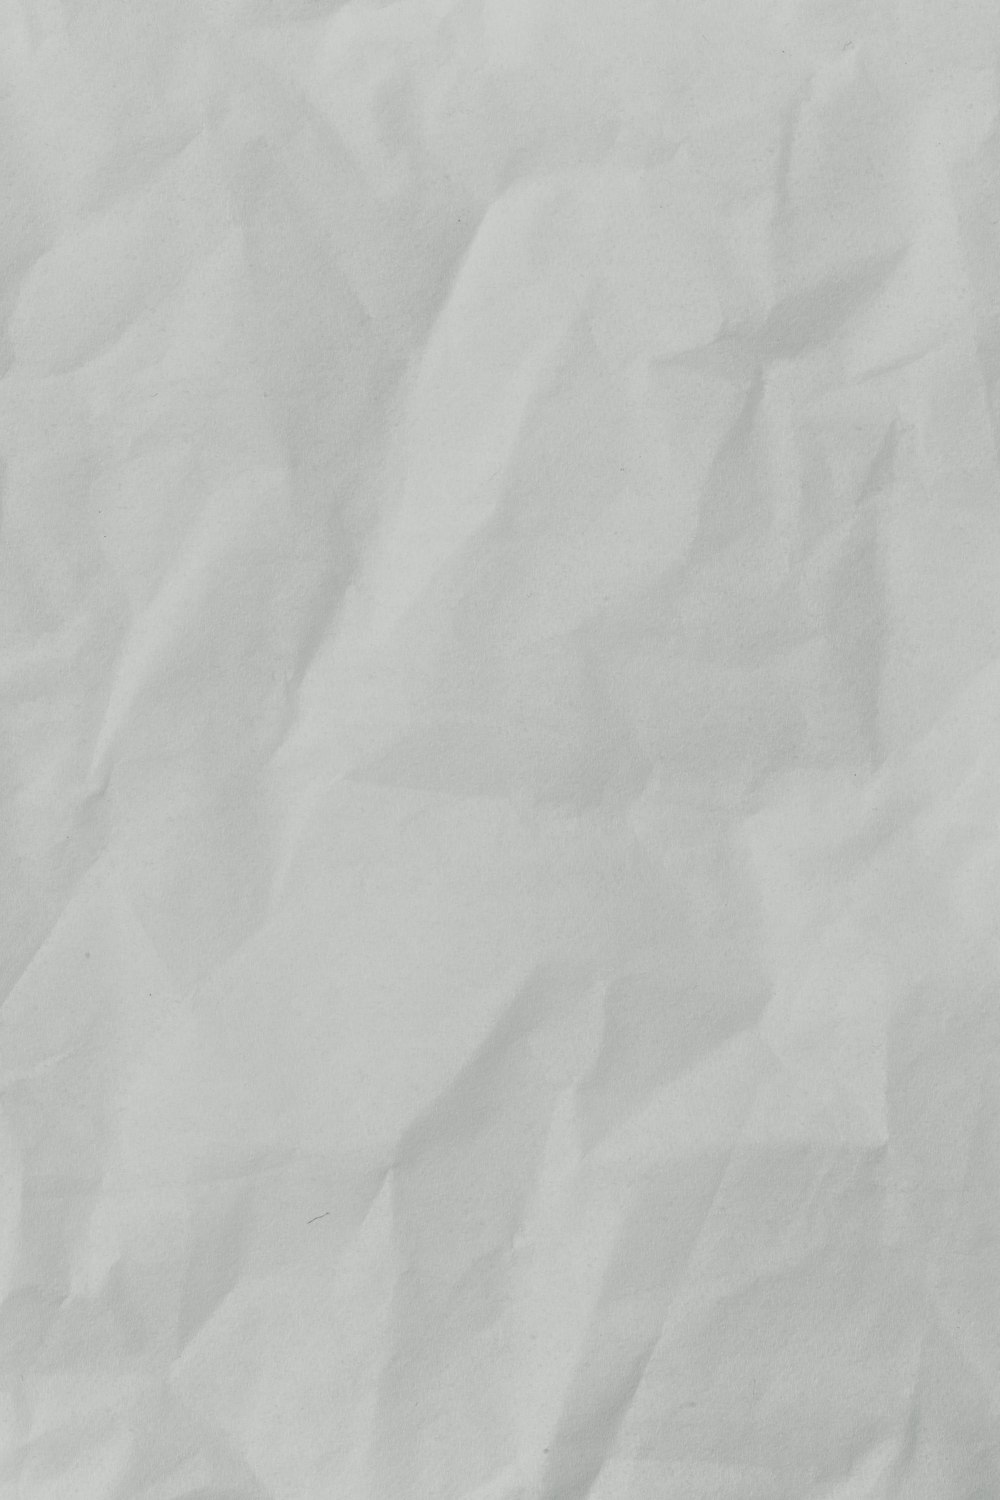 Crumpled Paper Texture Images – Browse 1,130 Stock Photos